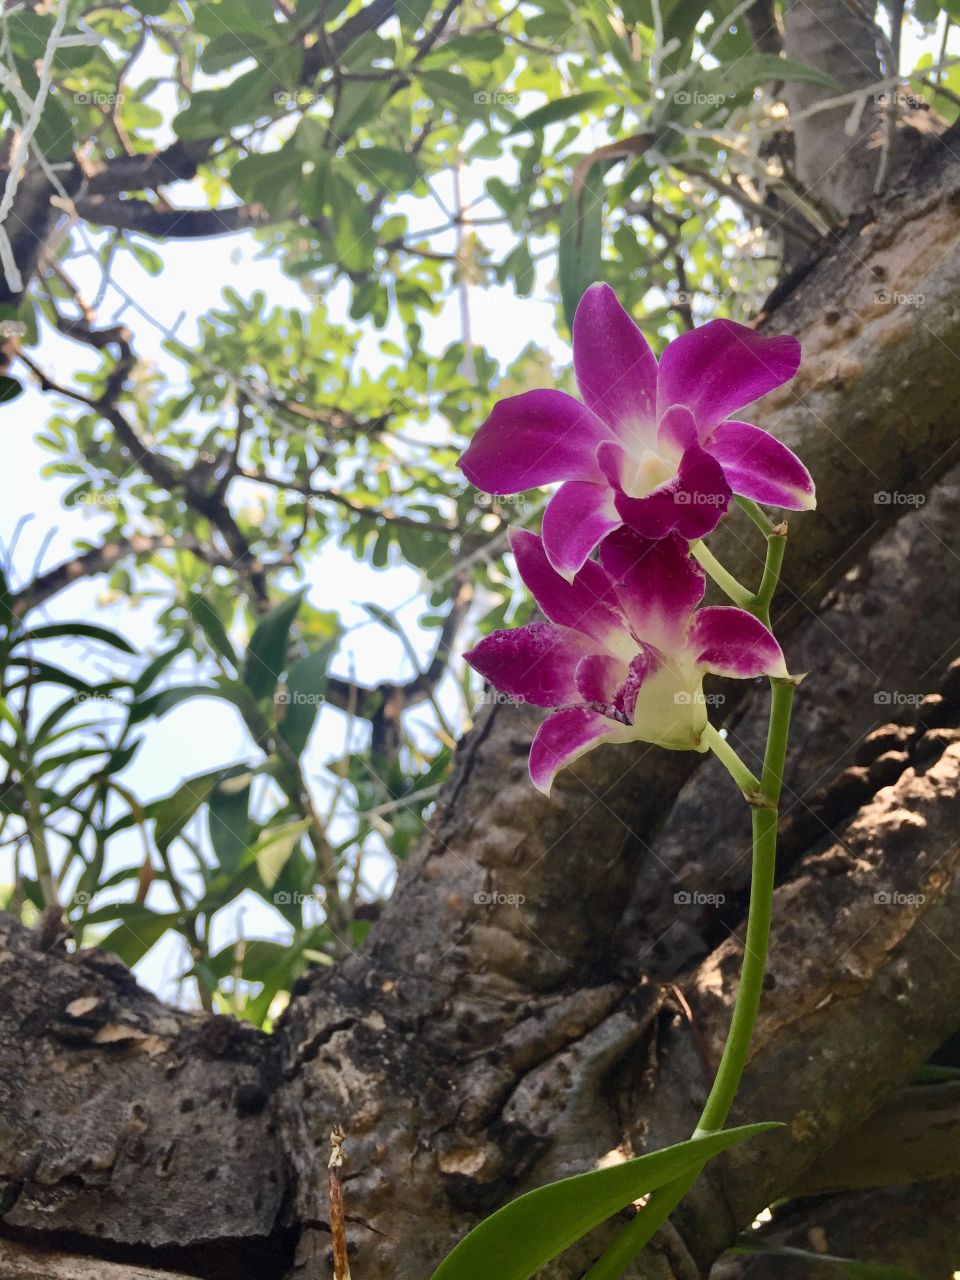 Orchid flowers blooming in the garden 